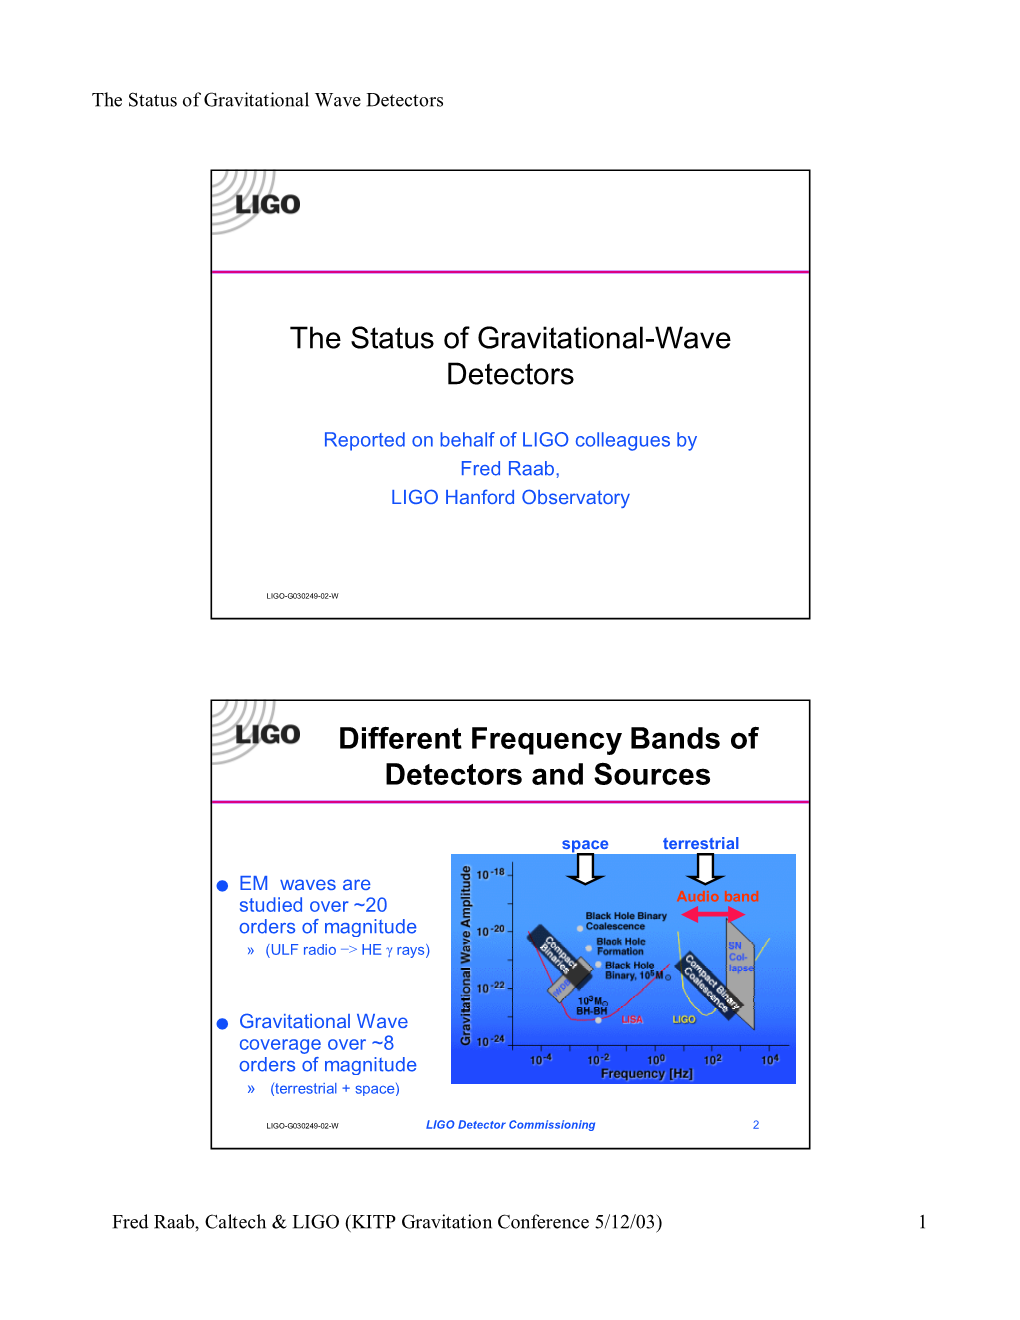 The Status of Gravitational-Wave Detectors Different Frequency